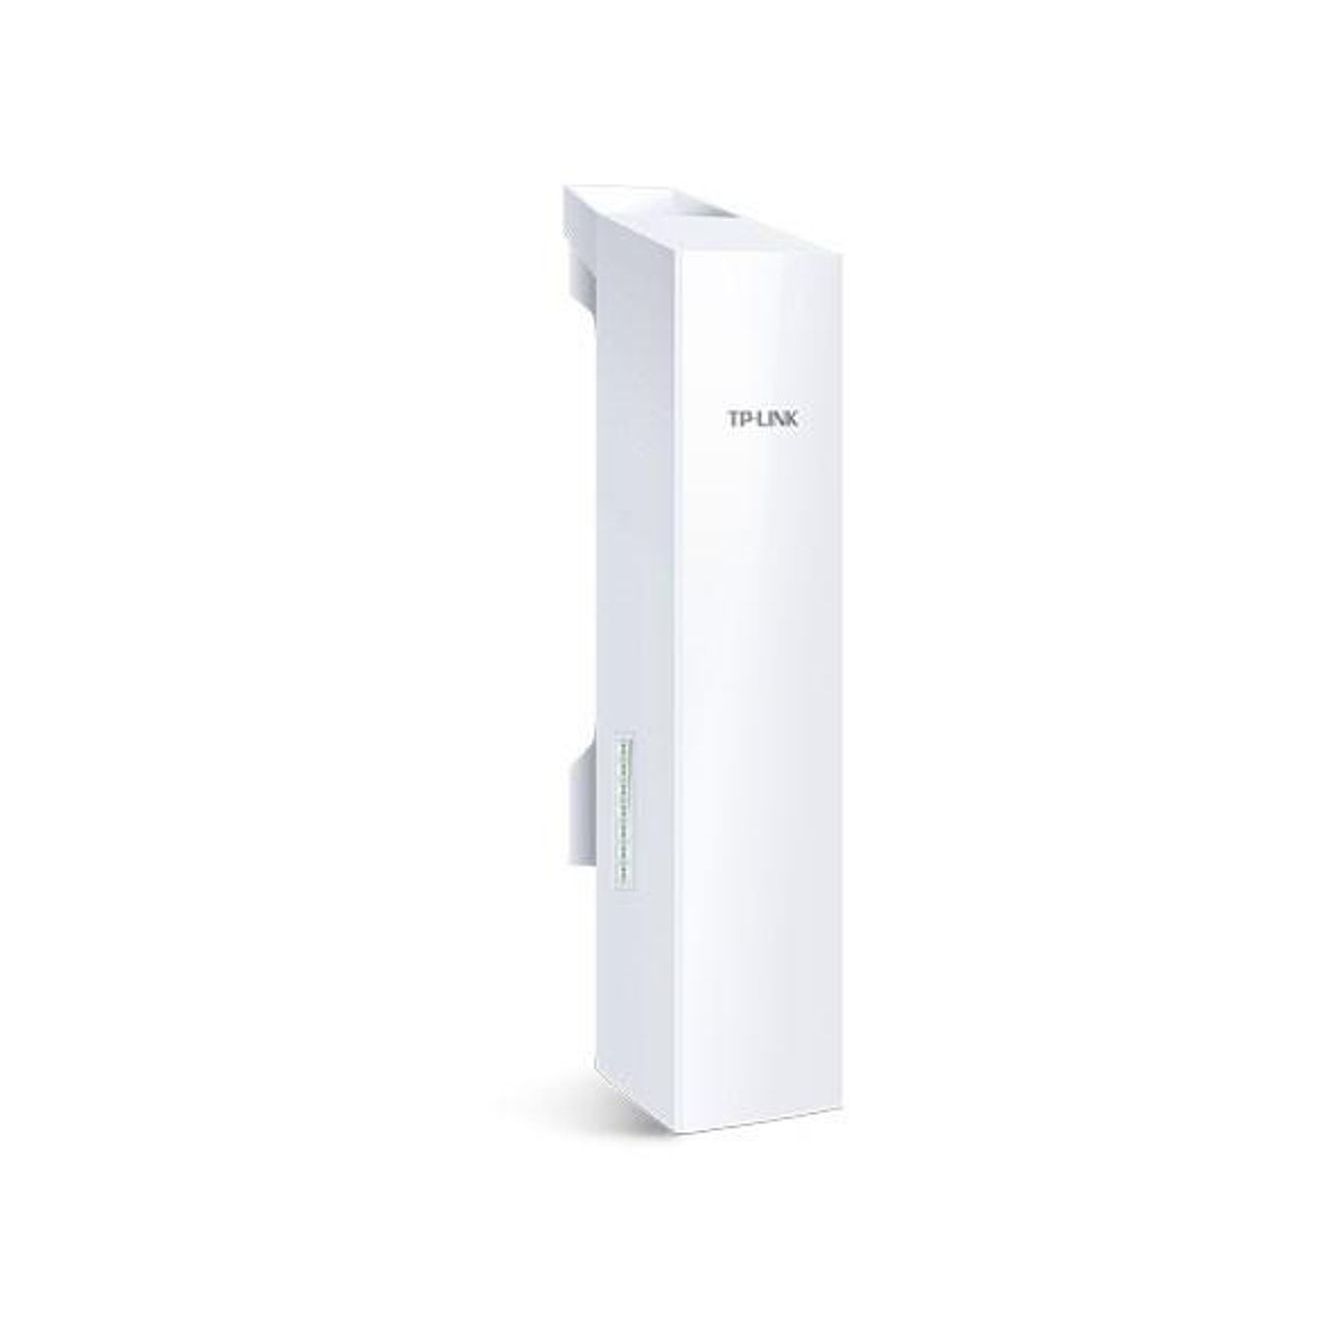 TL-CPE220 - TP-LINK CPE220 2.4GHz 300Mbps 12dBi Outdoor CPE